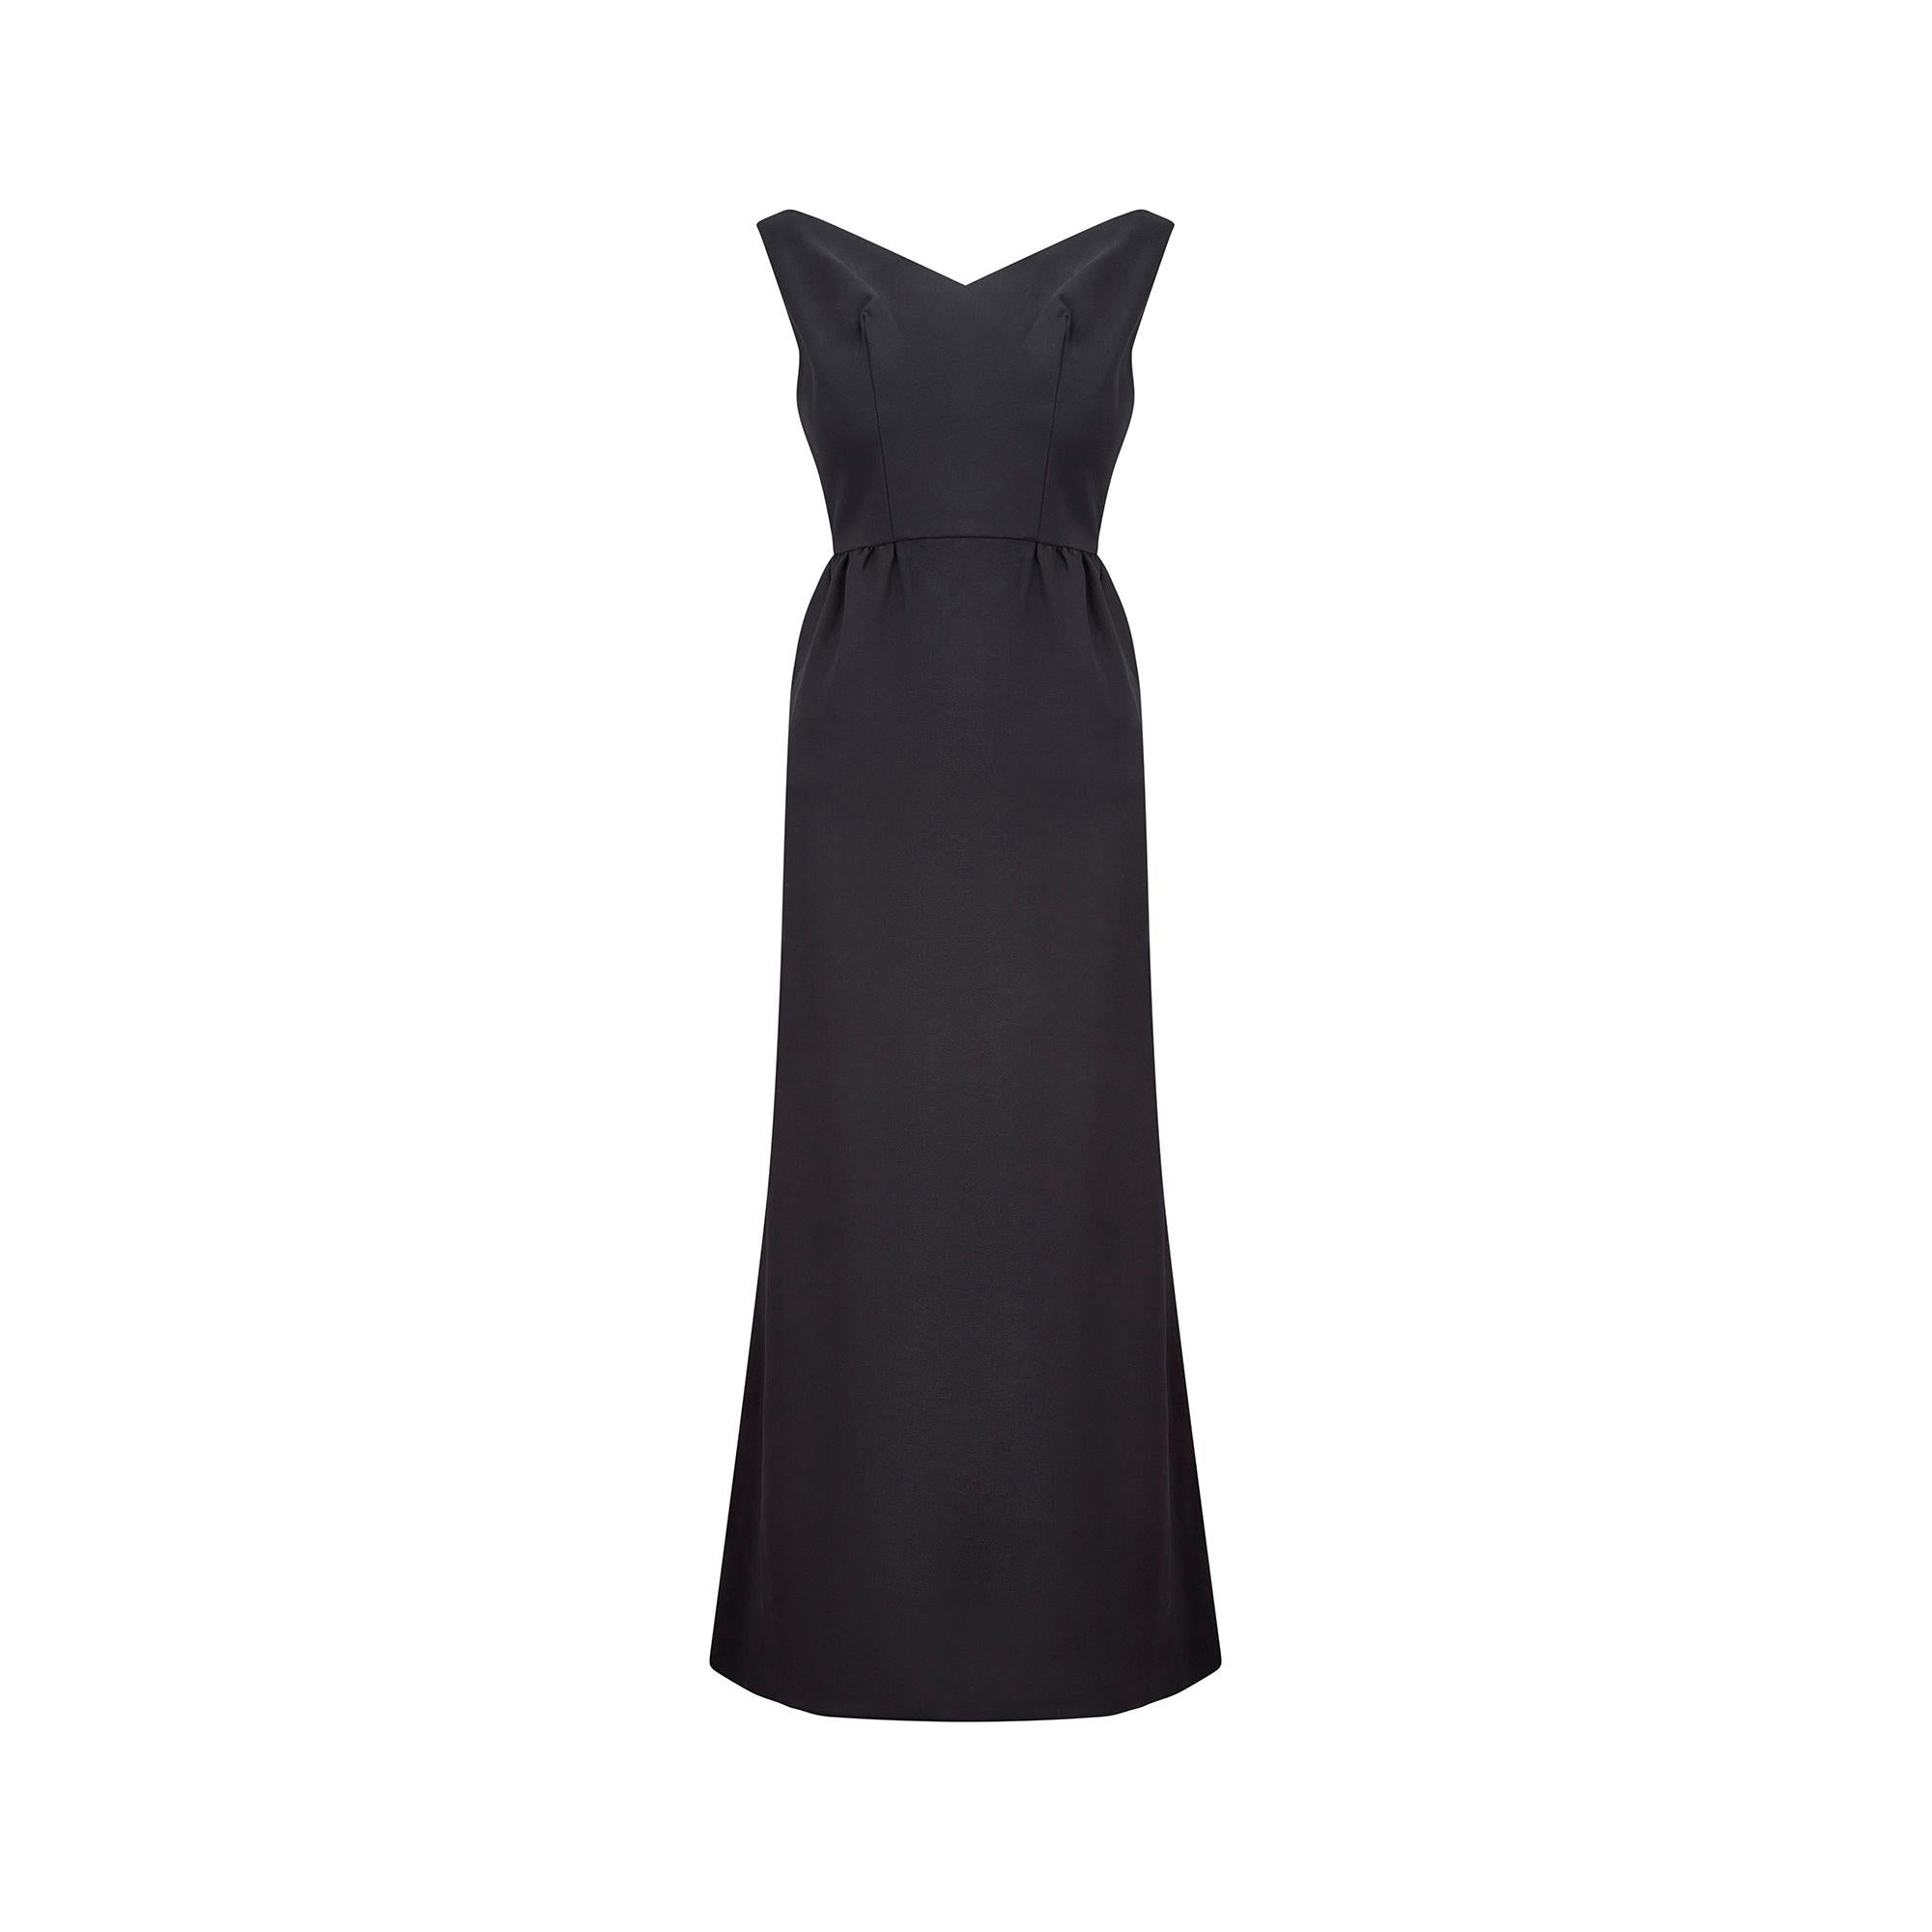 Made in the 1960s, this classic, sleeveless black crepe dress is in excellent vintage condition. A V-shaped, wide neckline reveals the decolletage. Delicate pleating at the rear and flared, fishtail tailoring to the skirt add interesting detail to